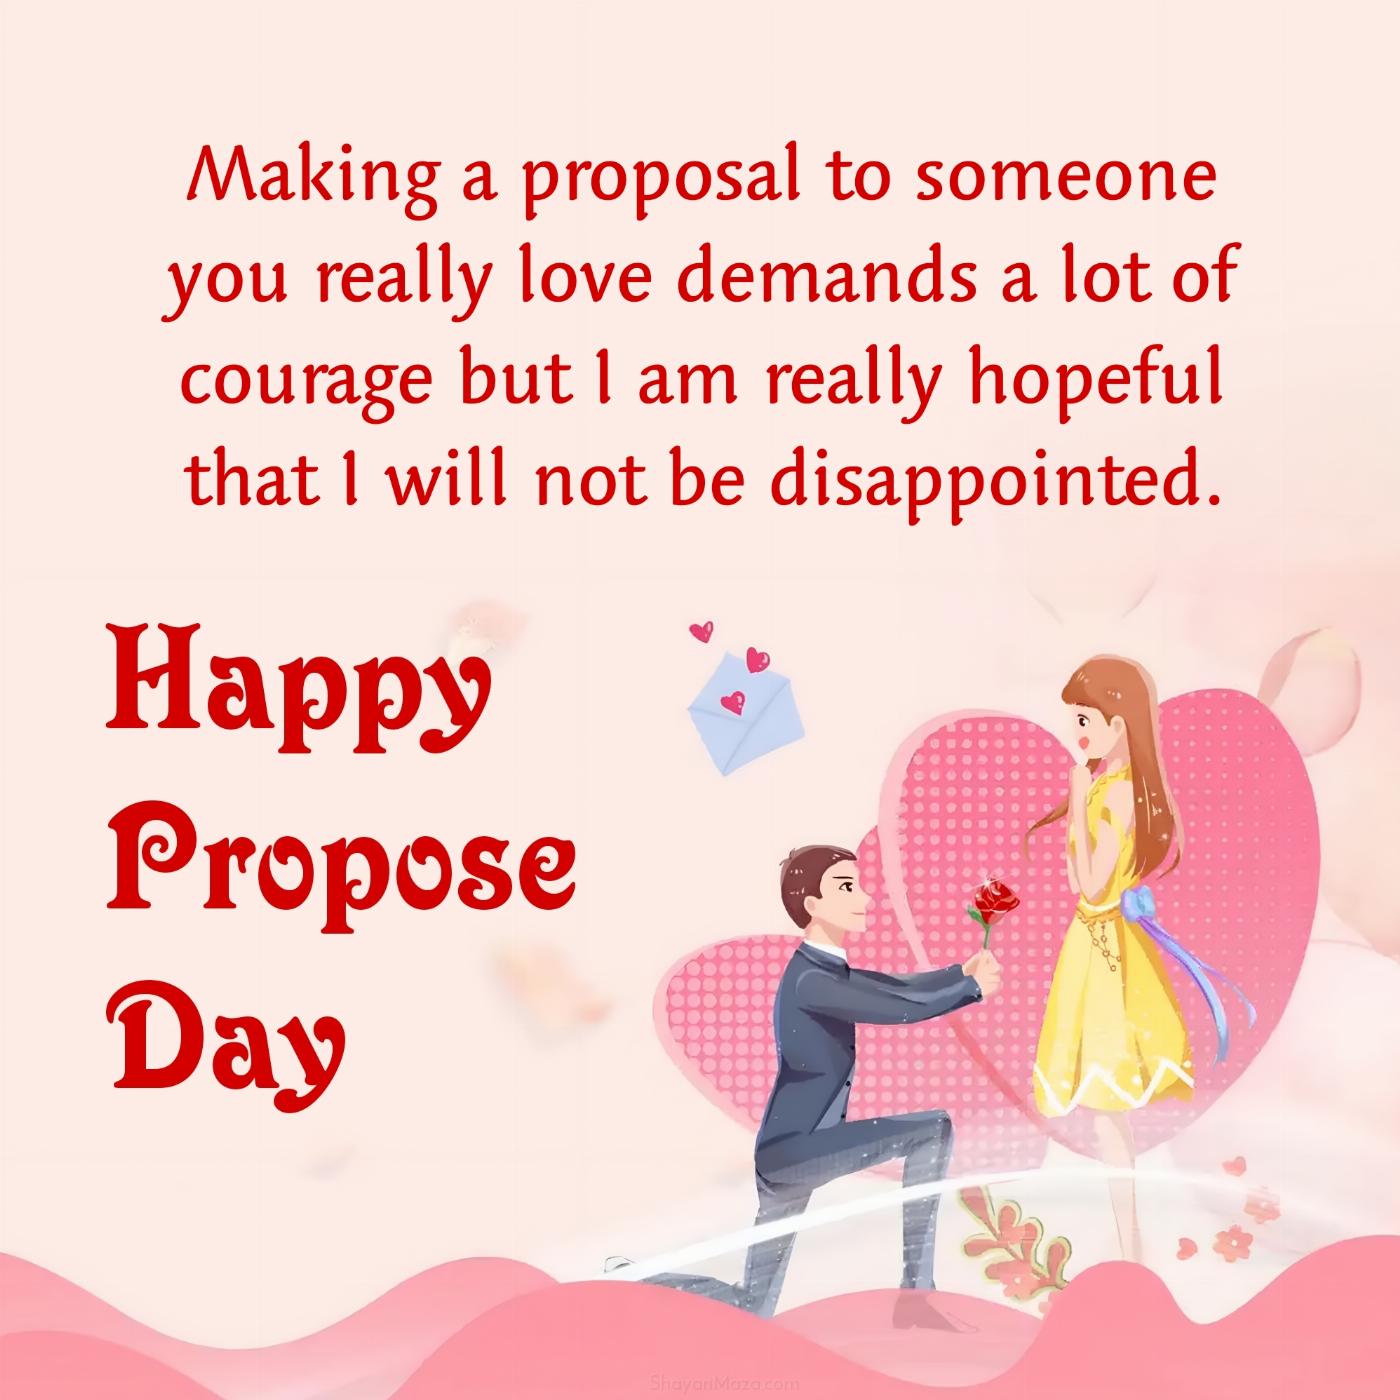 Making a proposal to someone you really love demands a lot of courage